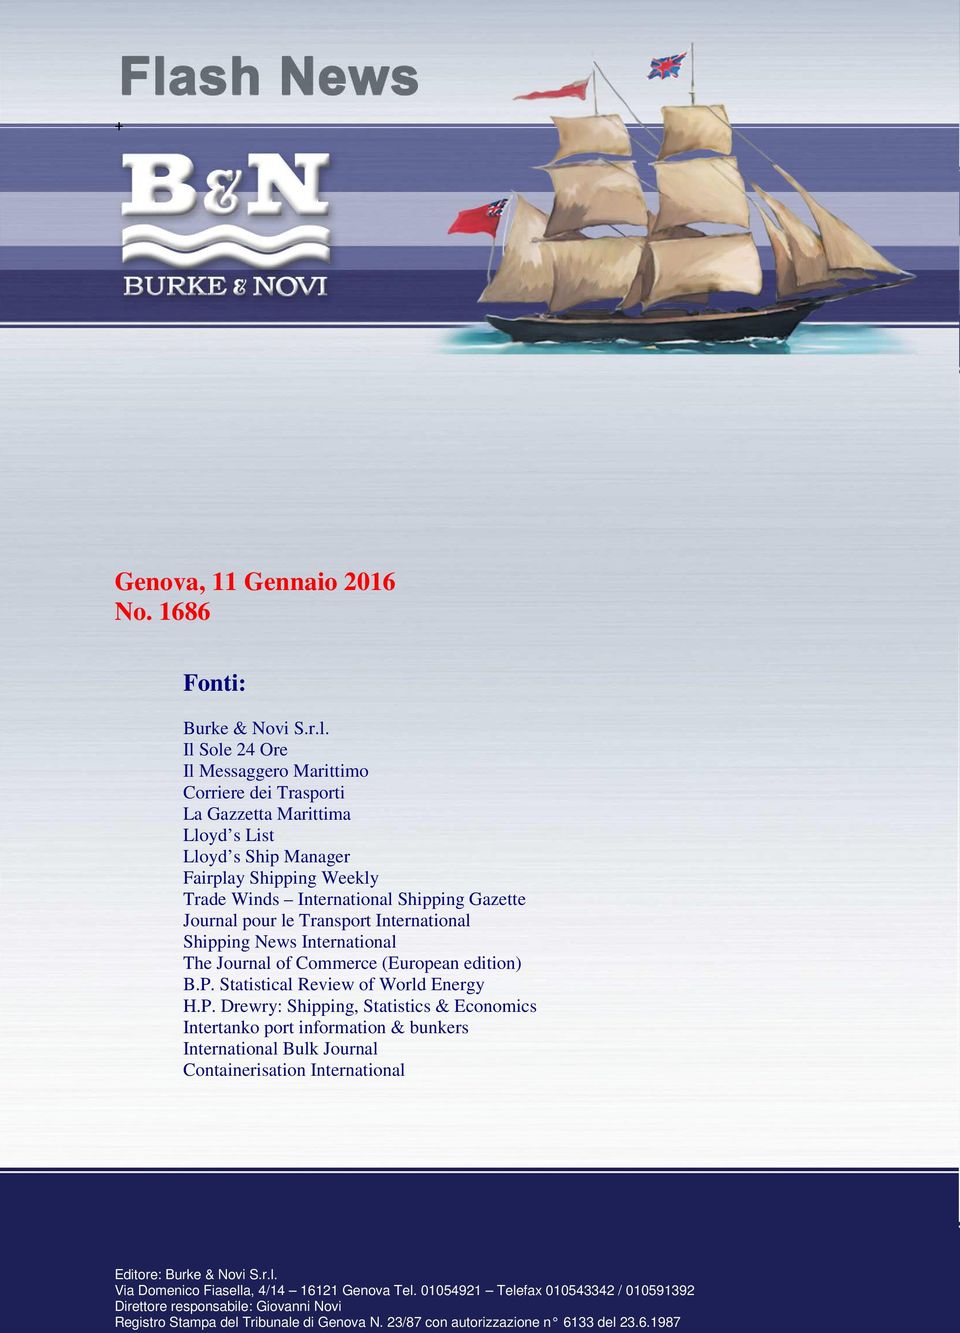 pour le Transport International Shipping News International The Journal of Commerce (European edition) B.P.